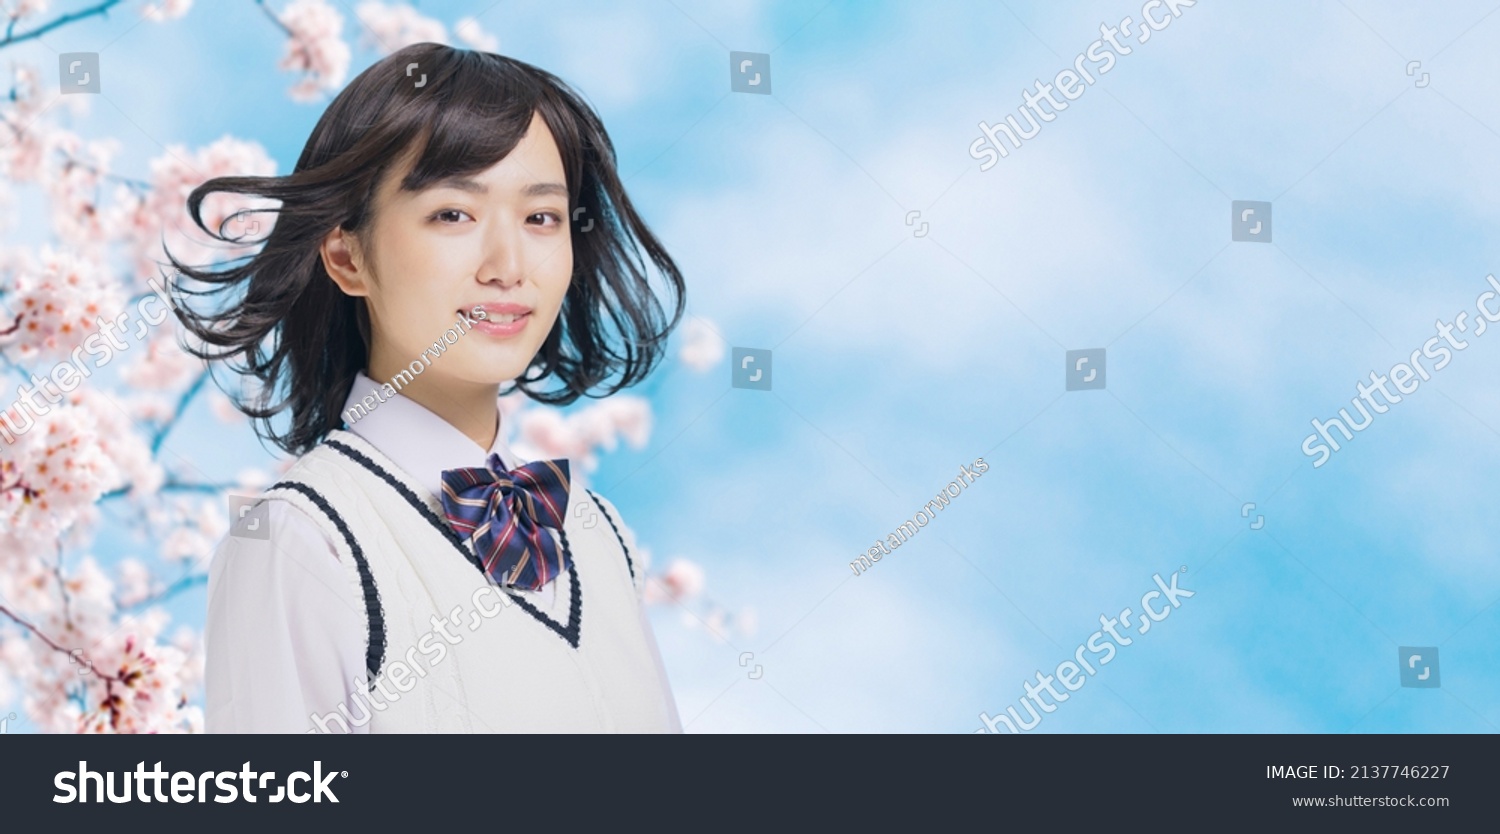 Young asian school girl blowing her hair in front of cherry blossoms. #2137746227